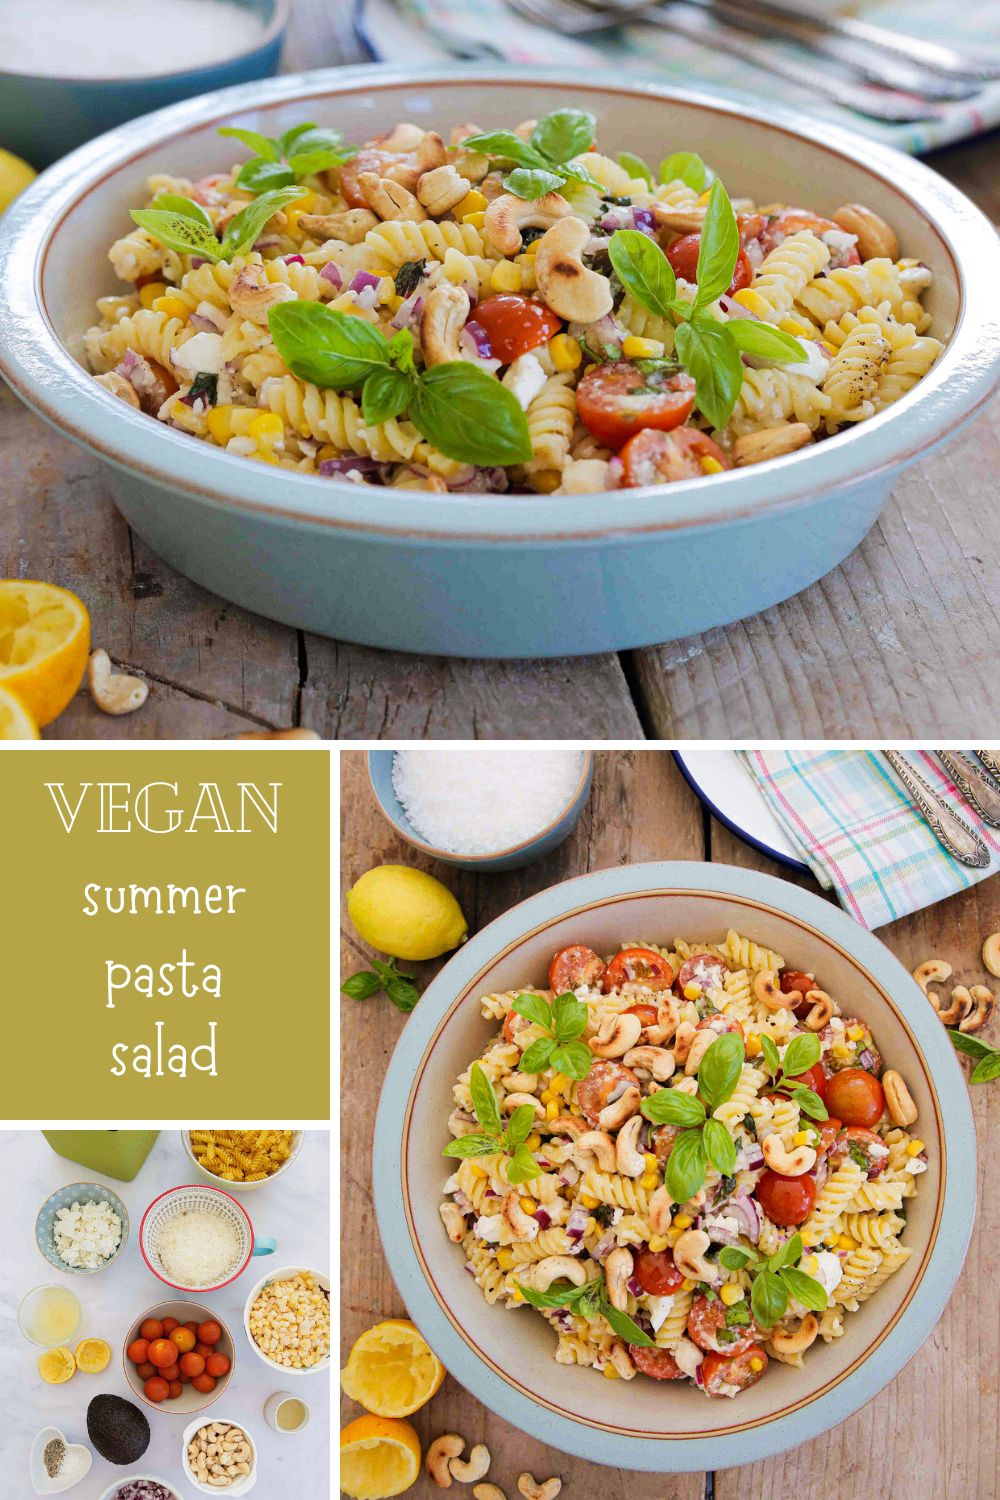 Bright and fresh Italian summer pasta salad perfect for picnics, pot lucks and lunchboxes! Super easy to make and just as delicious warm or cold. Lots of fresh veggies and herbs along with tangy vegan feta and a simple pasta salad dressing. Recipe on thecookandhim.com #pastasalad #summerpastasalad #vegansalad #pastarecipes #italianpastasalad #easypastasalad #healthydinner #summermeals #picnicfood #easylunchboxideas